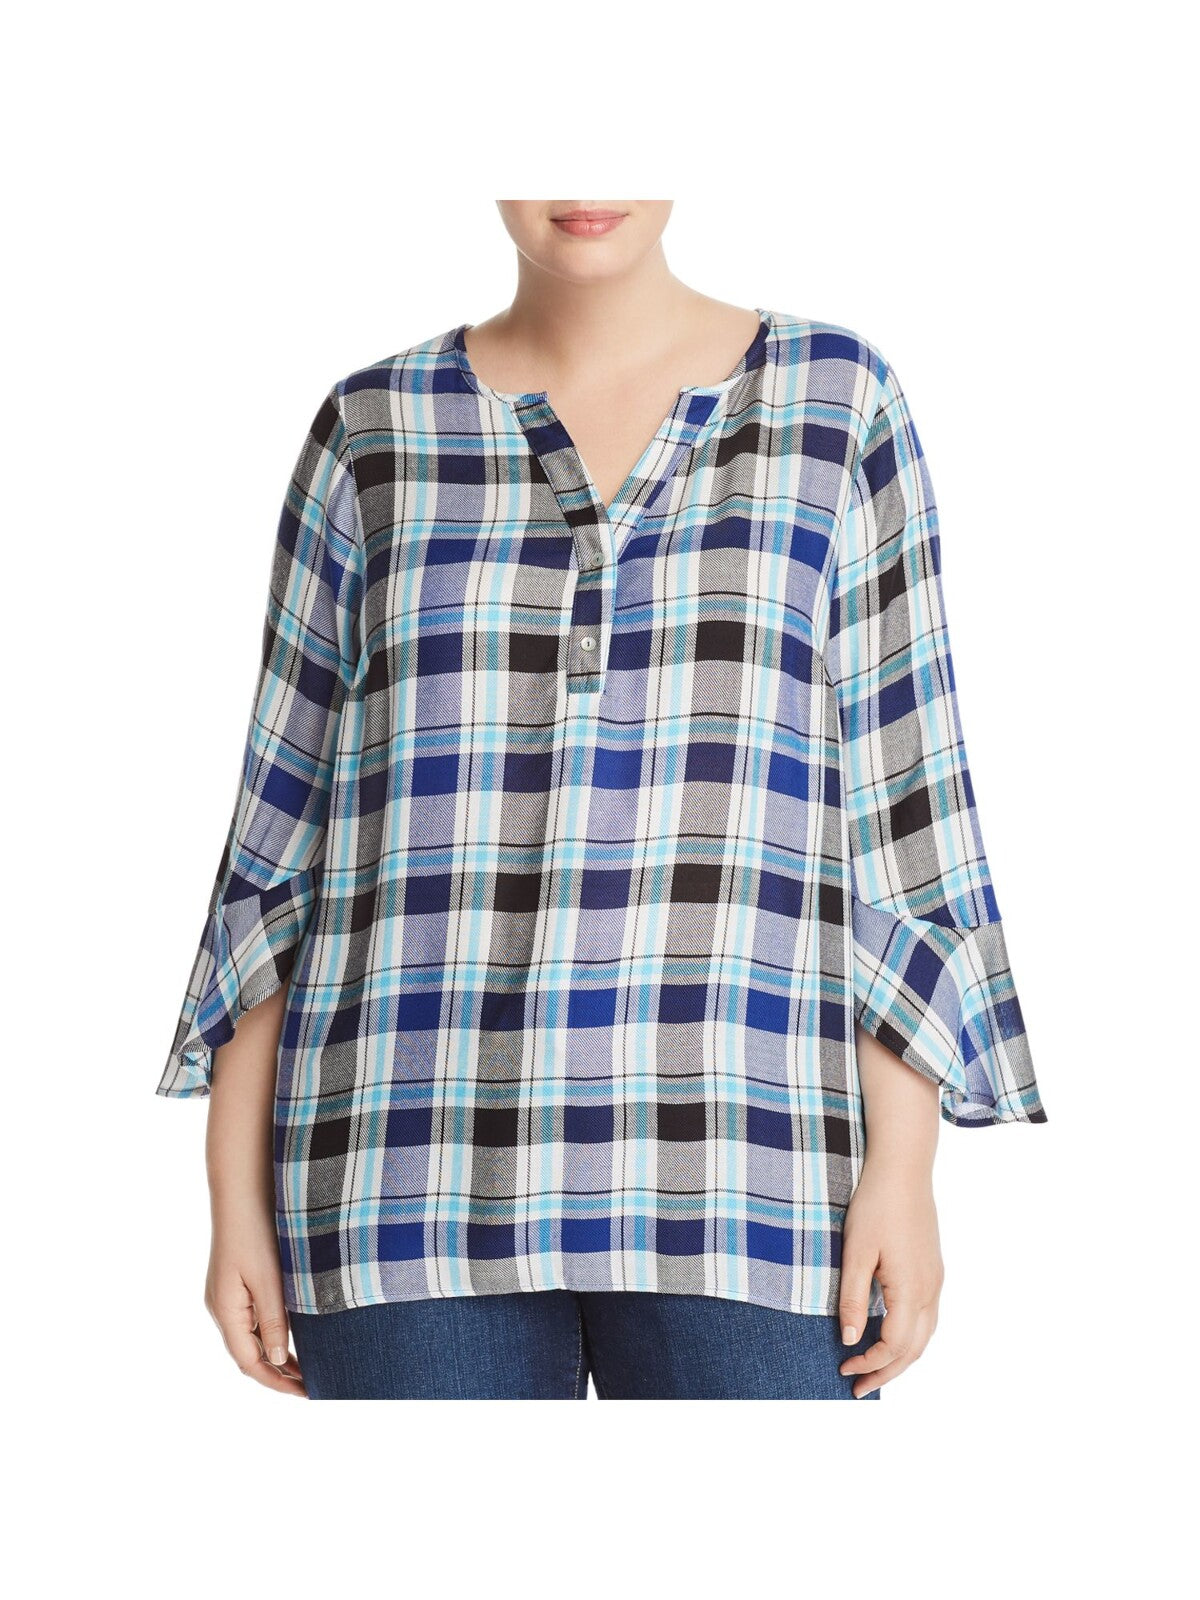 STATUS BY CHENAULT Womens Blue Ruffled Buttoned Plaid 3/4 Sleeve Split Top Plus 1X